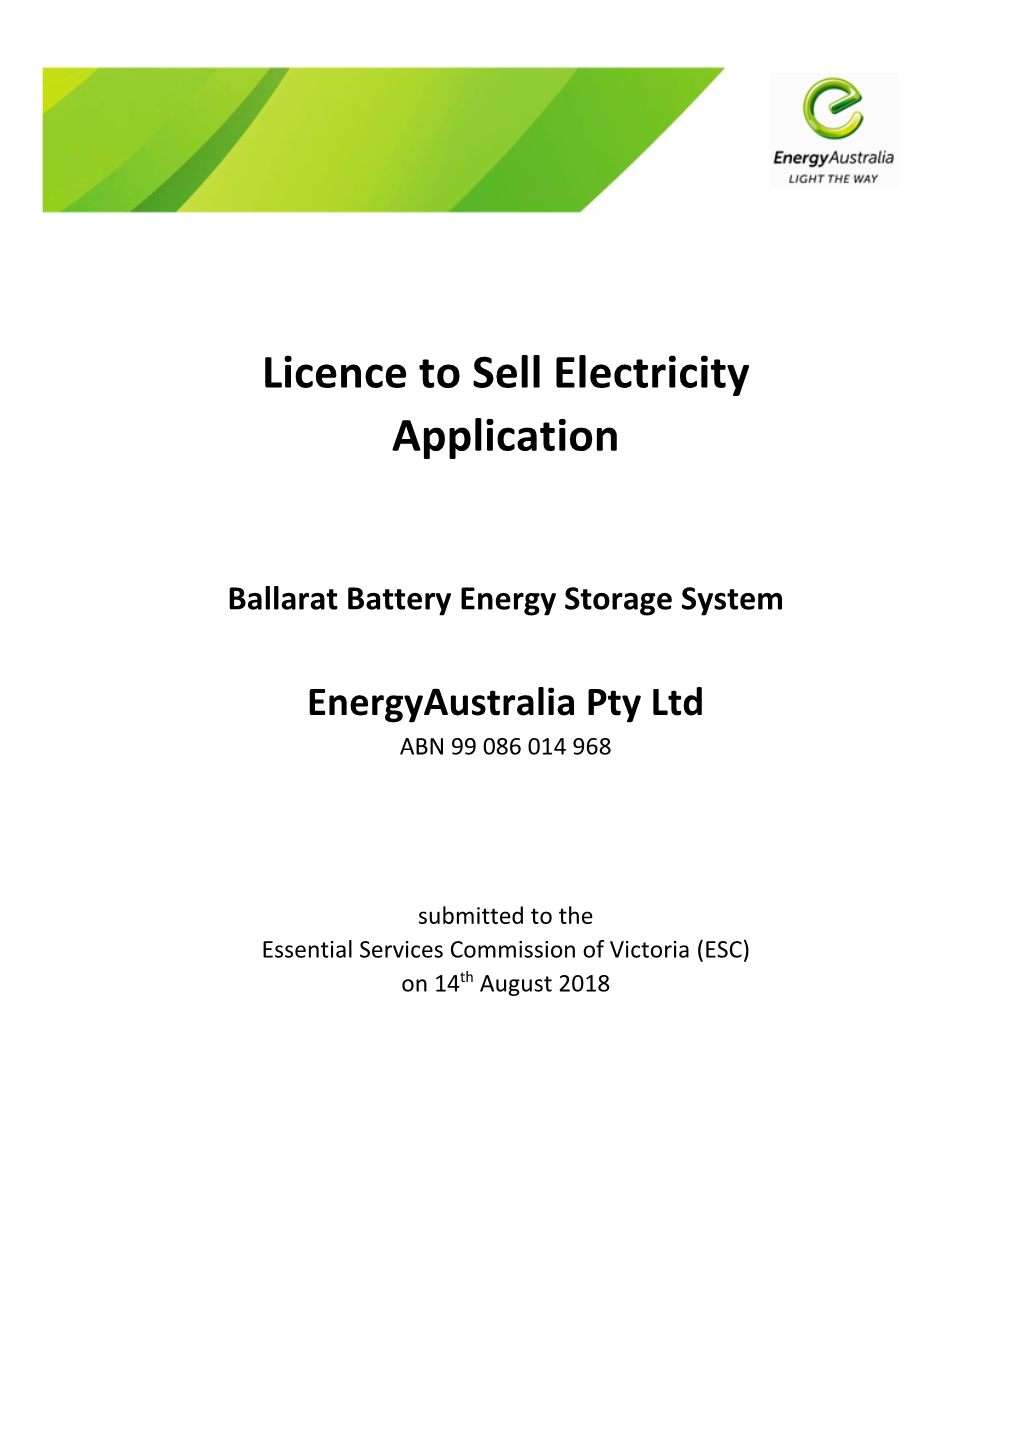 Licence to Sell Electricity Application